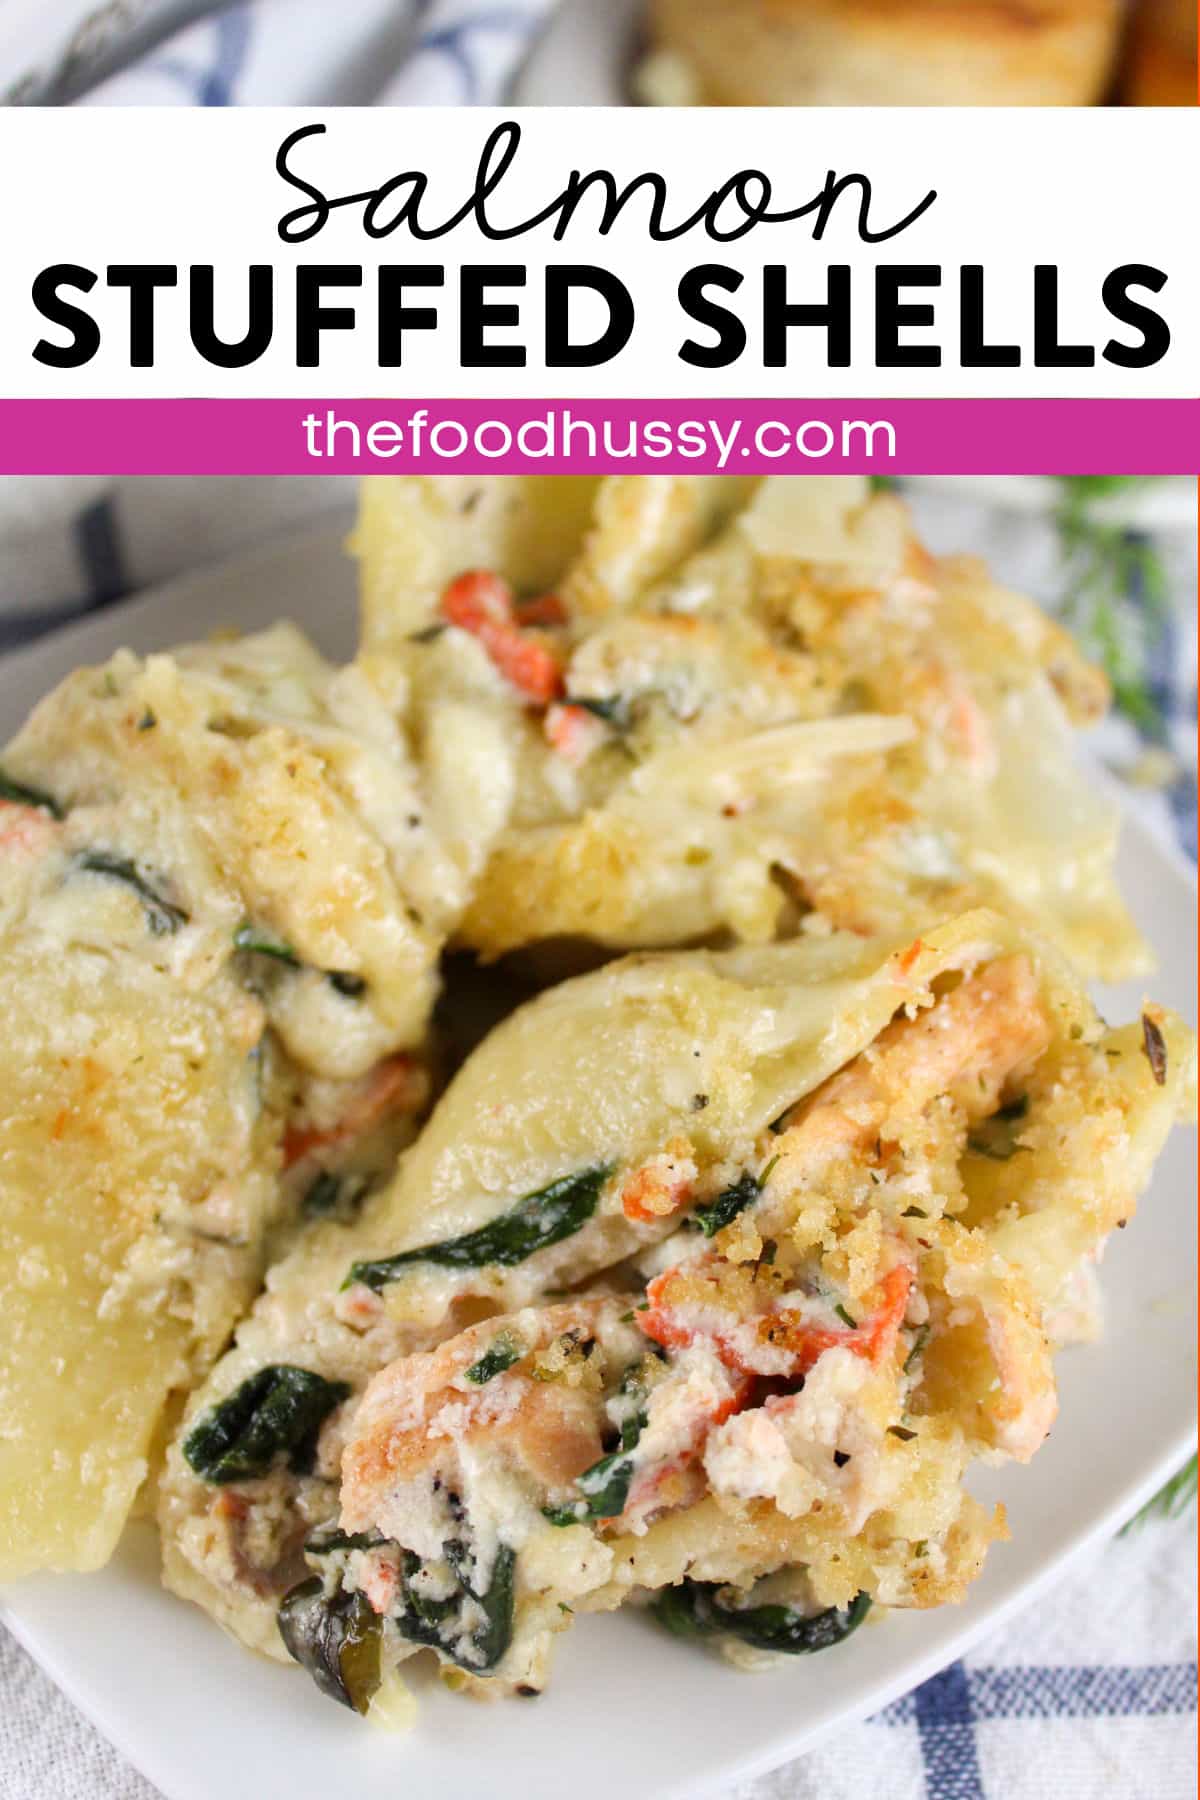 Salmon Stuffed Shells are a delicious pasta dinner every salmon lover will enjoy! Tender pasta shells overstuffed with spinach, ricotta cheese and perfectly cooked salmon!  via @foodhussy